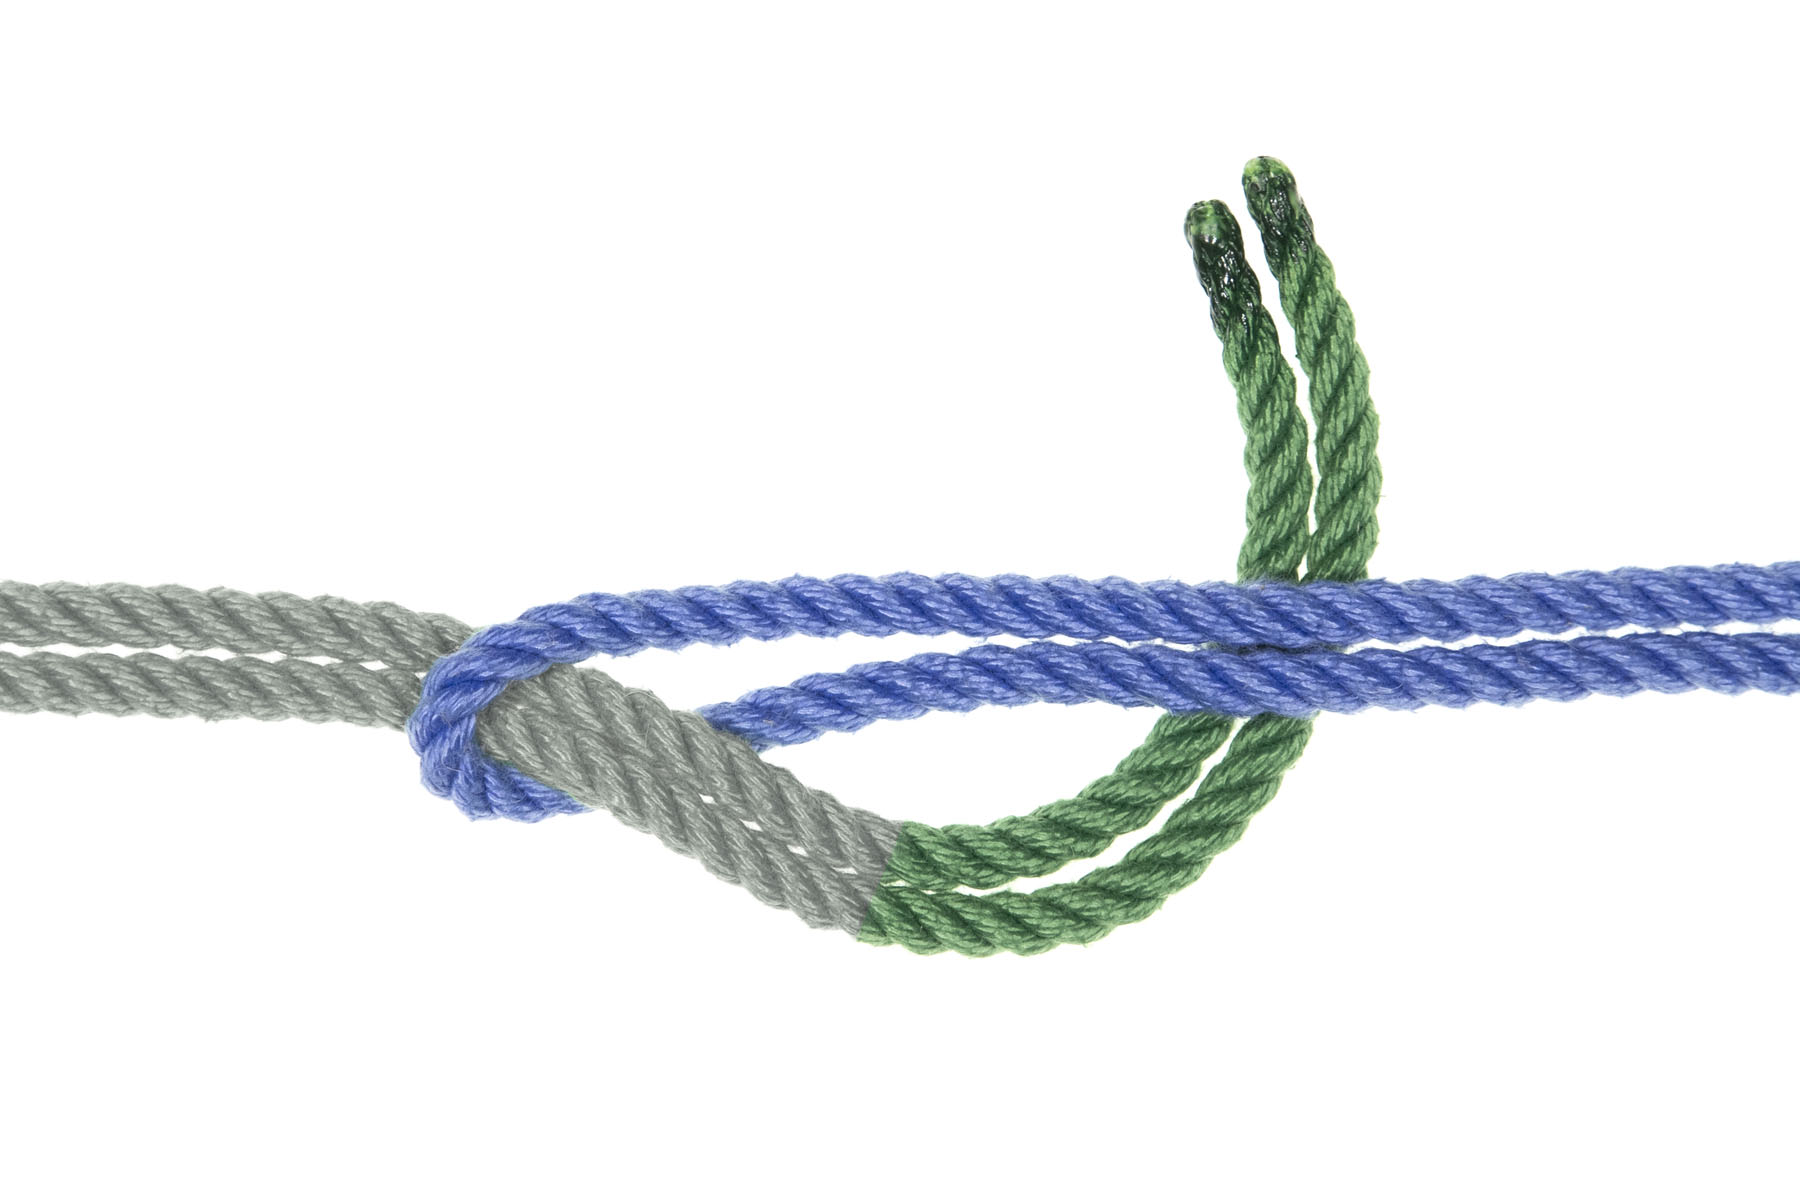 The ends of the green rope turn and pass under the standing part of the blue rope, moving toward the top of the image.